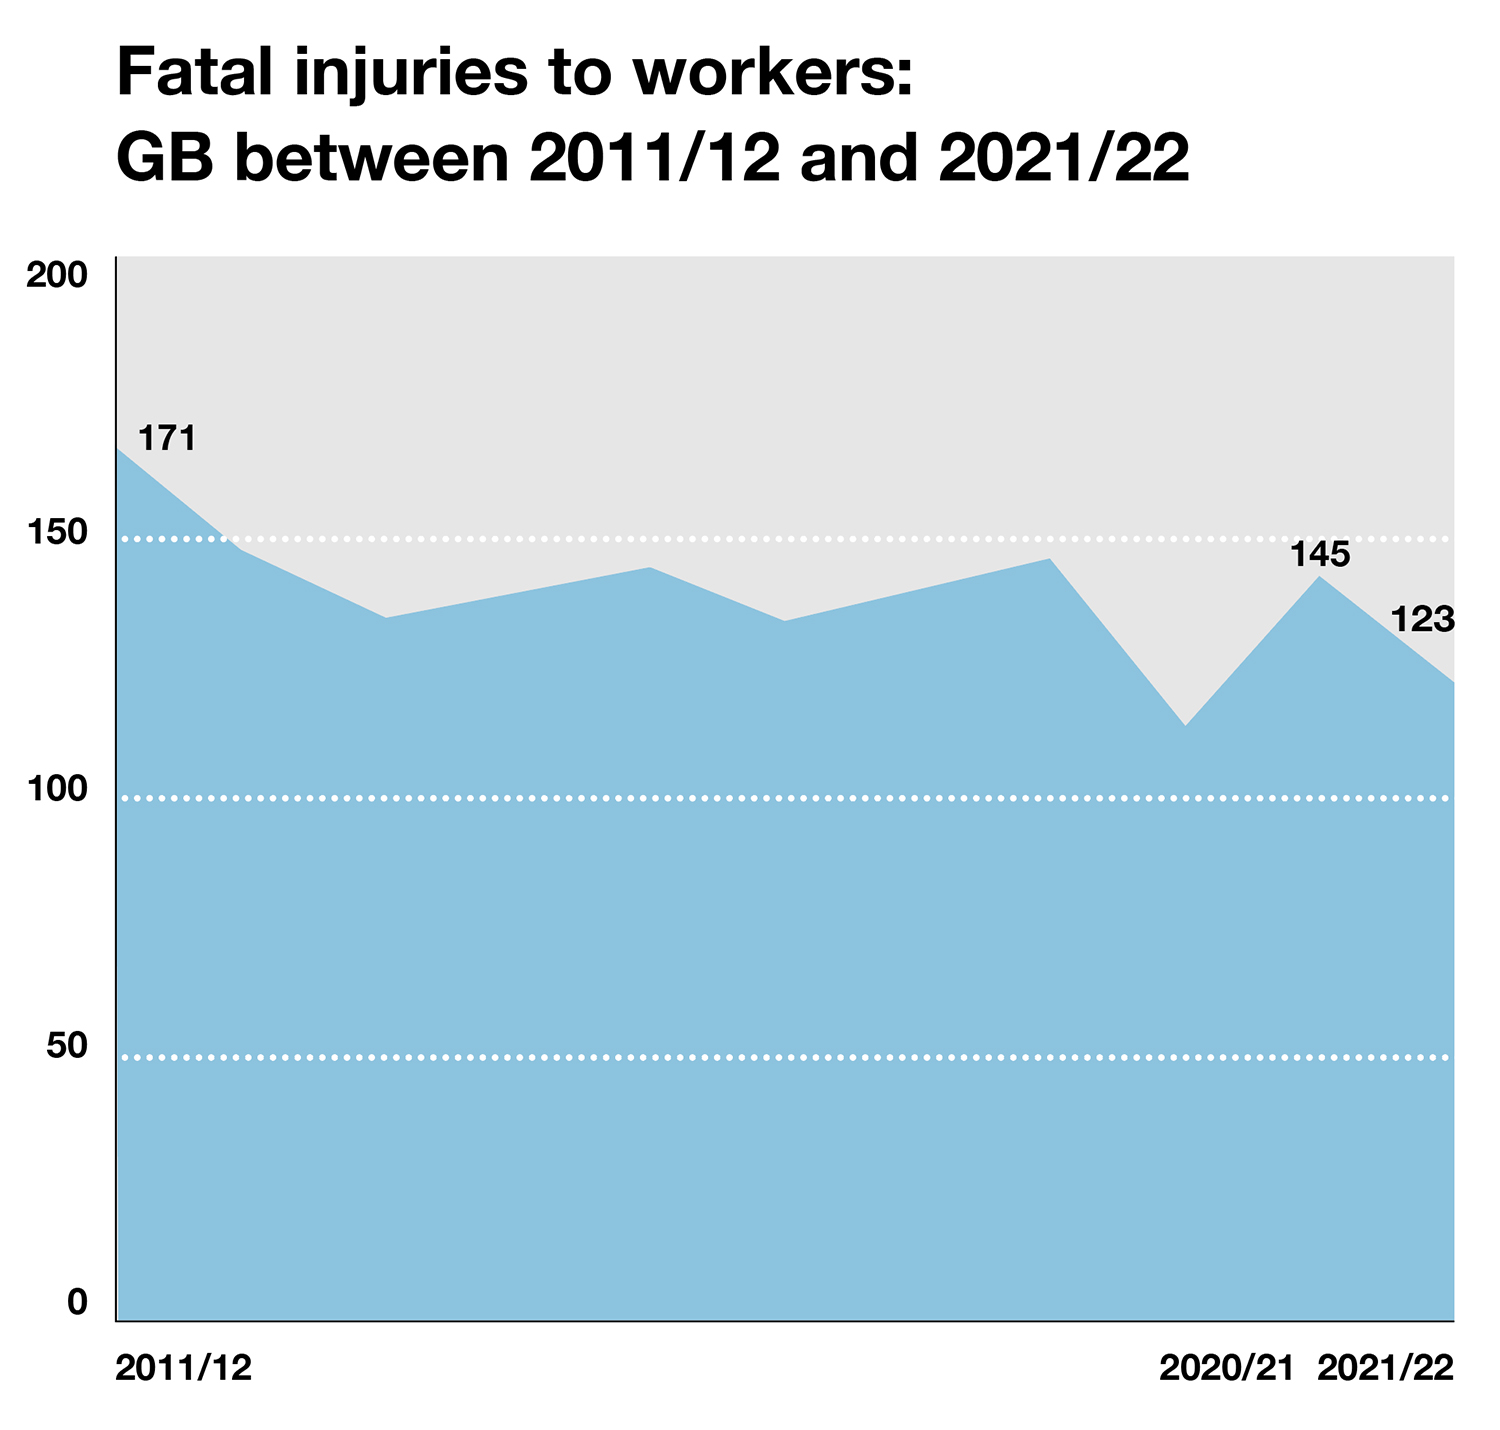 Construction deaths drop - Fatal injuries to workers between 2011 and 2022